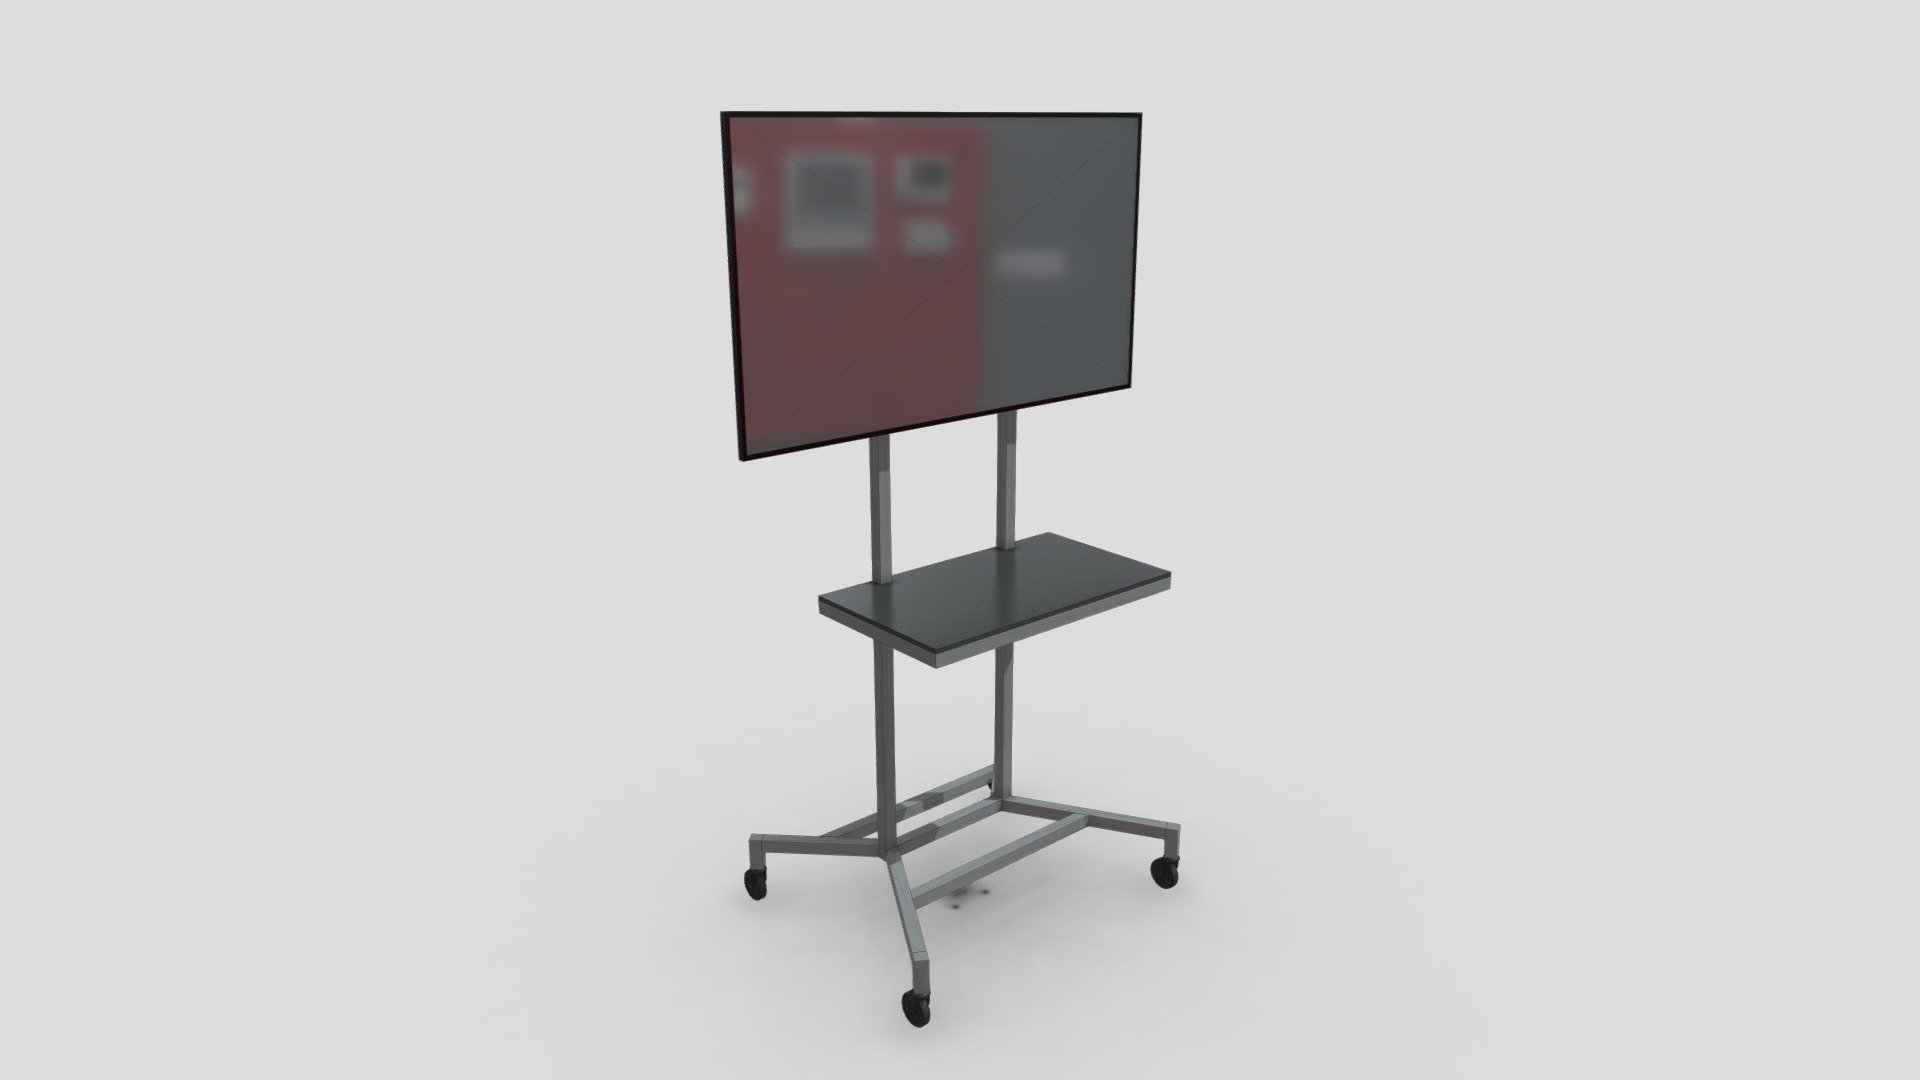 TV STAND TROLLEY - 3D model by 3D-VIEW (@Jake-norsemandirect) 3d model